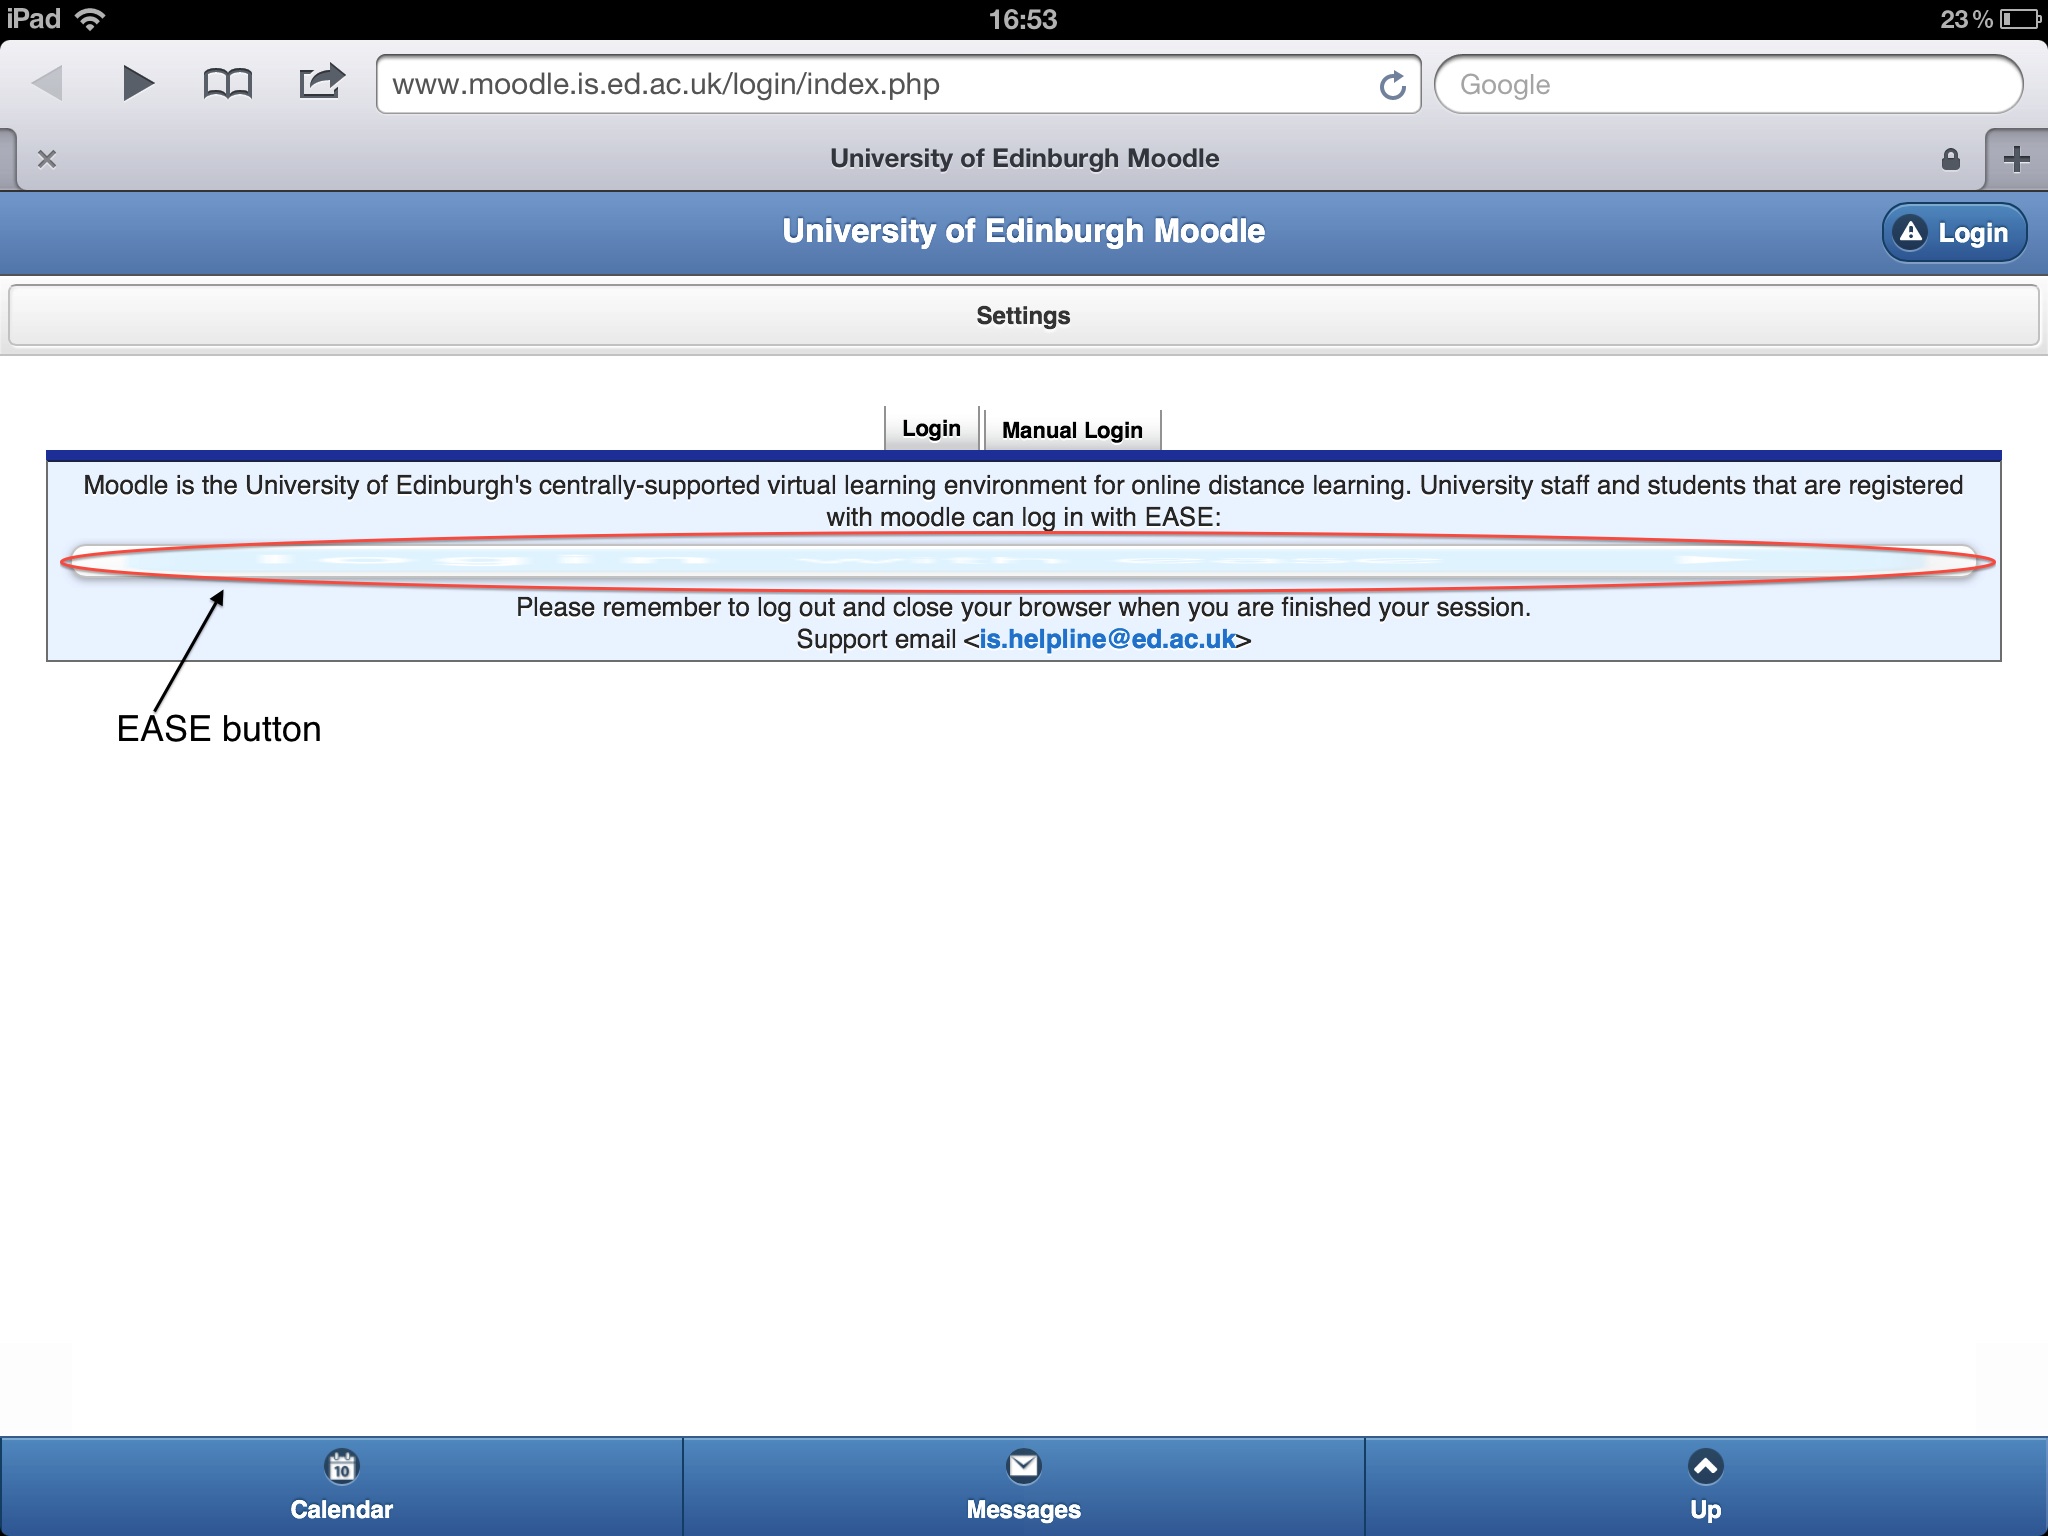 Attachment moodle_ipad_loginpage_annotated.jpg